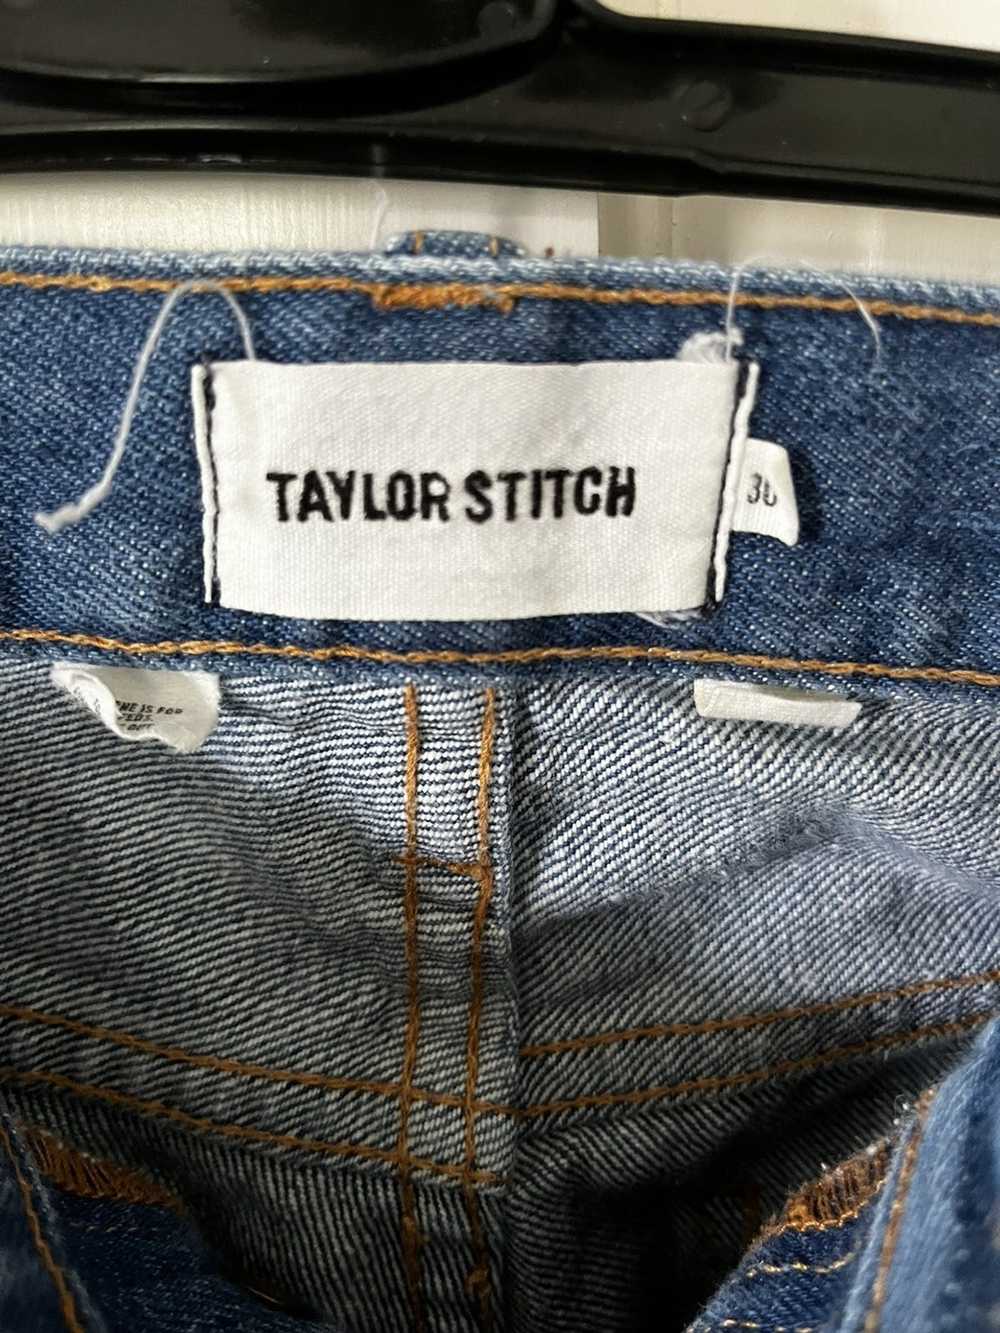 Taylor Stitch Taylor Stitch Made in USA jeans - image 2